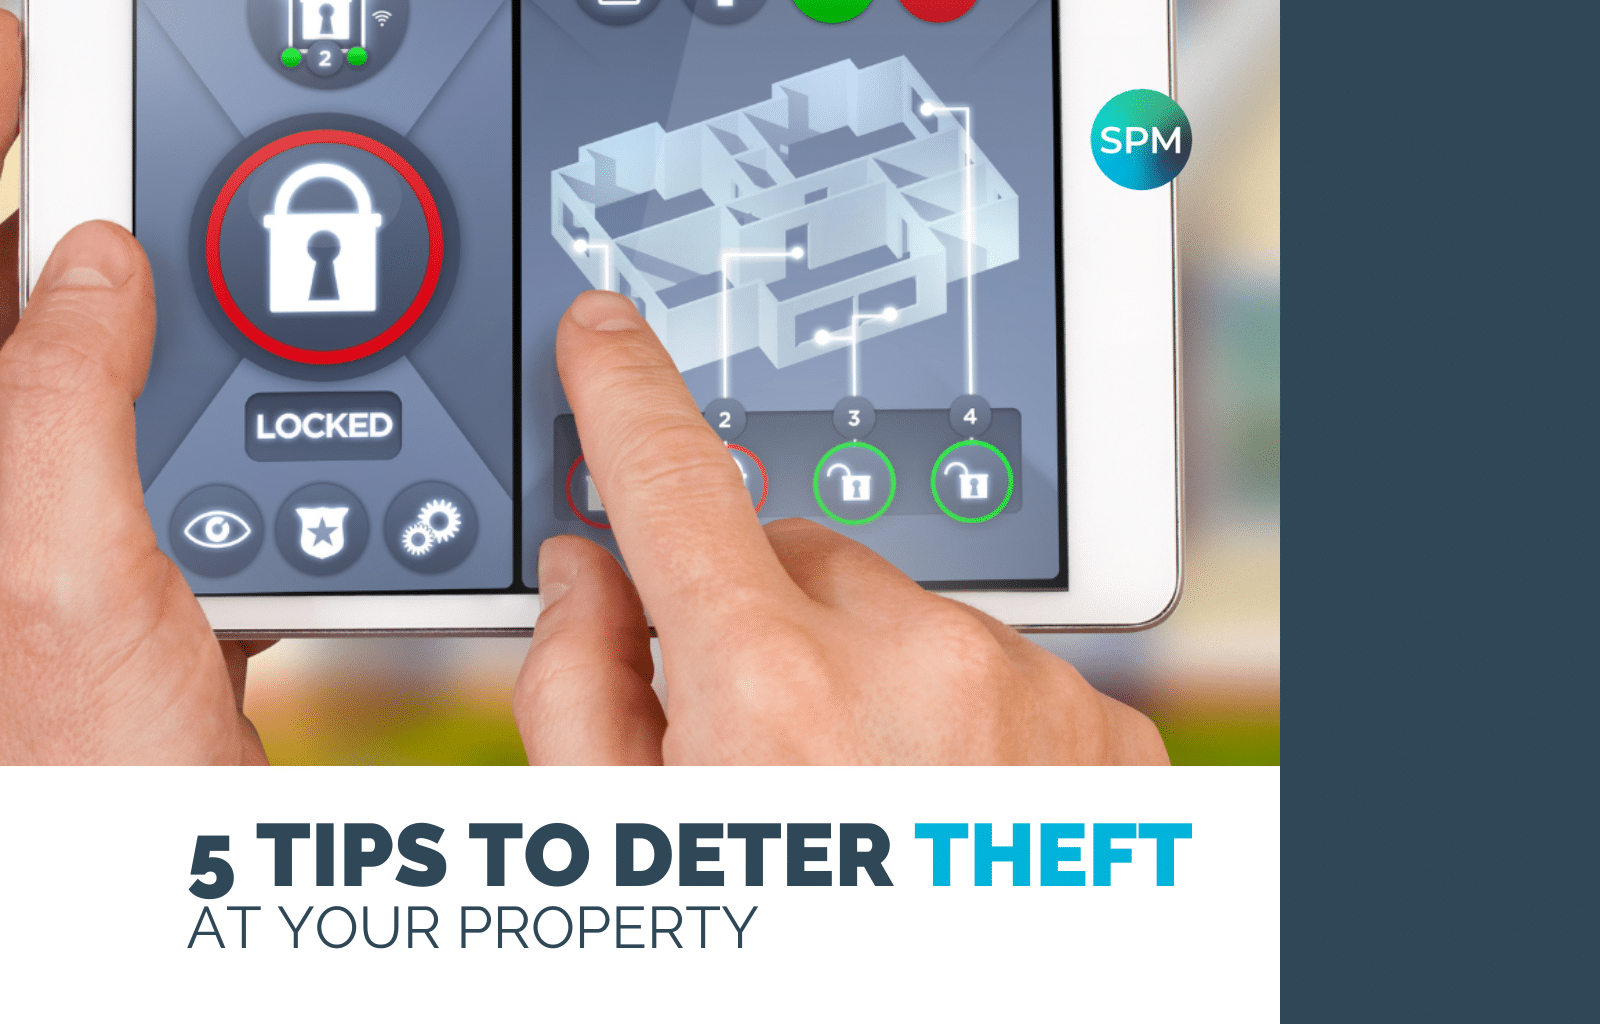 5 Tips to Deter Theft at Your Property.pdf